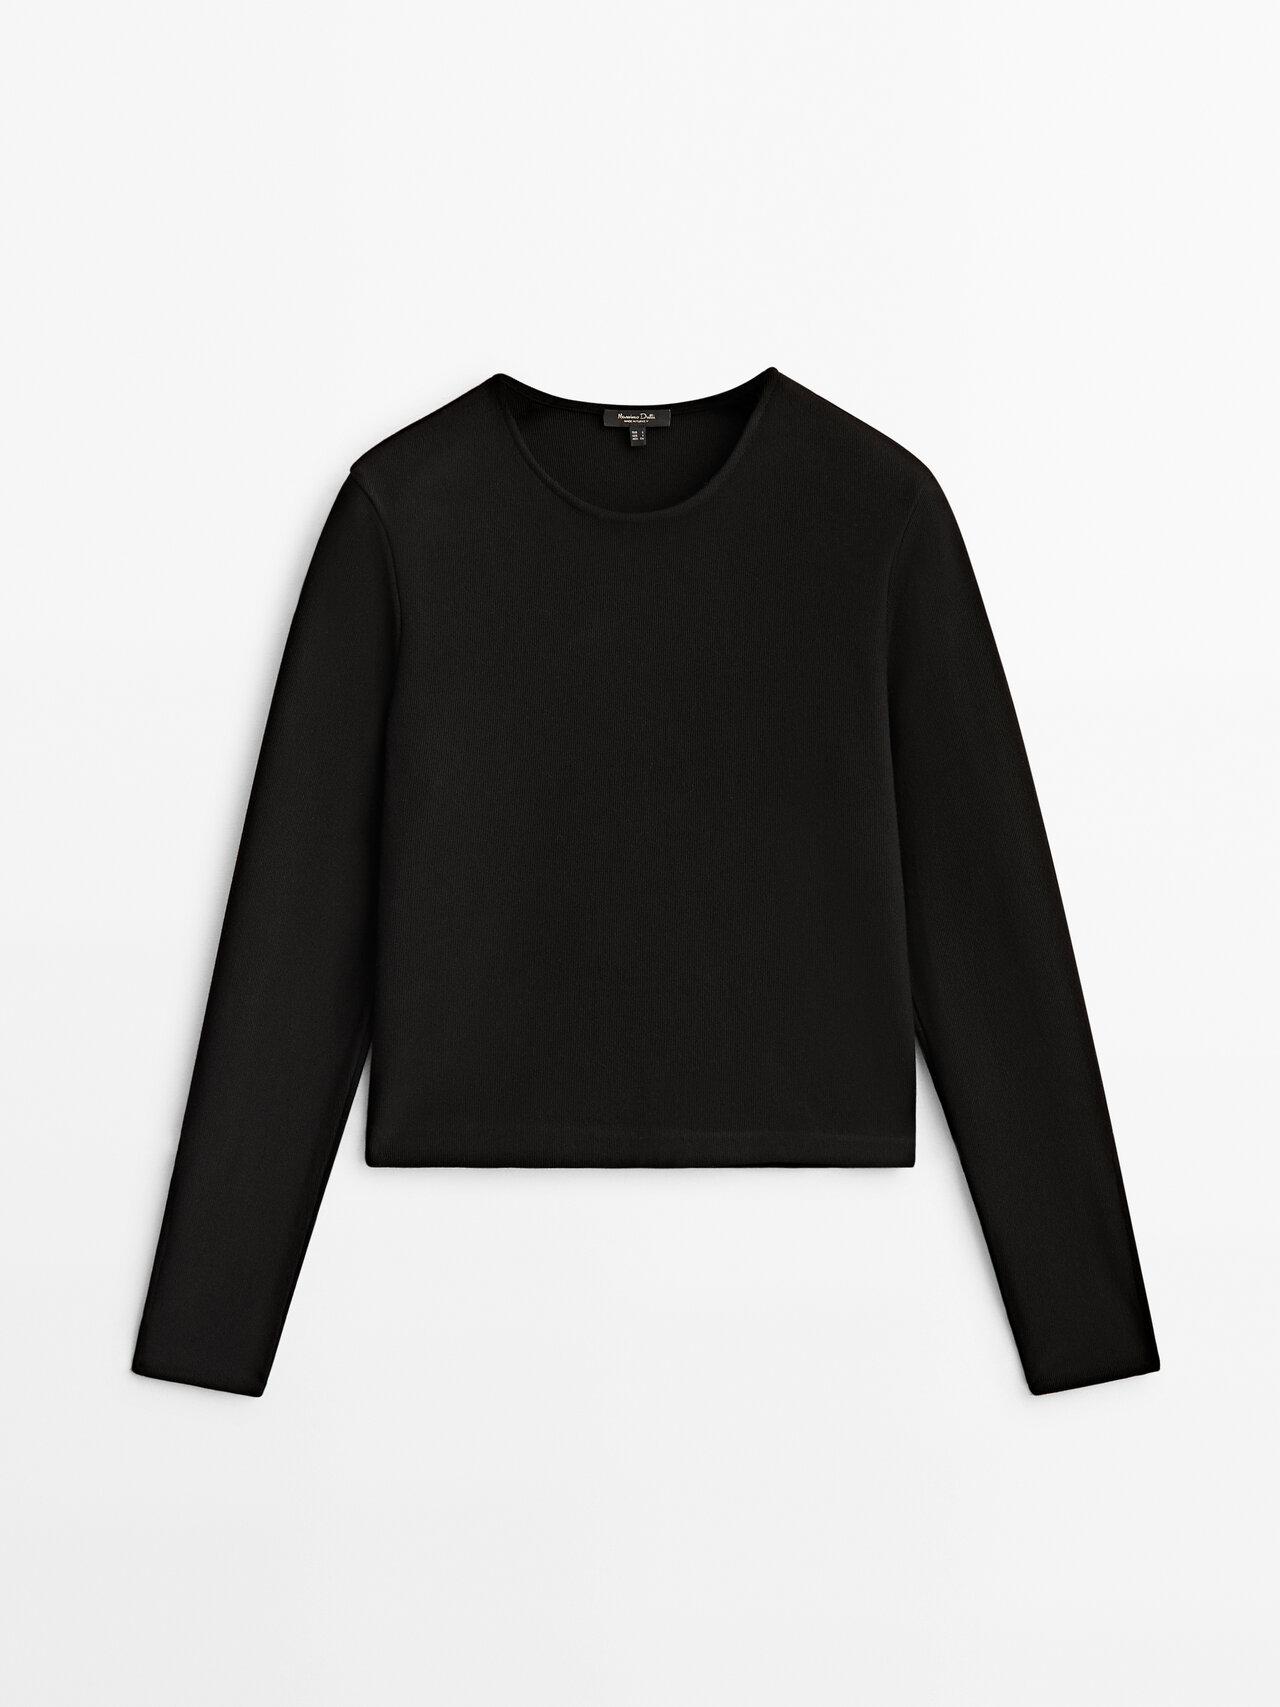 MASSIMO DUTTI T-shirt With Open Hoop Detail in Black | Lyst